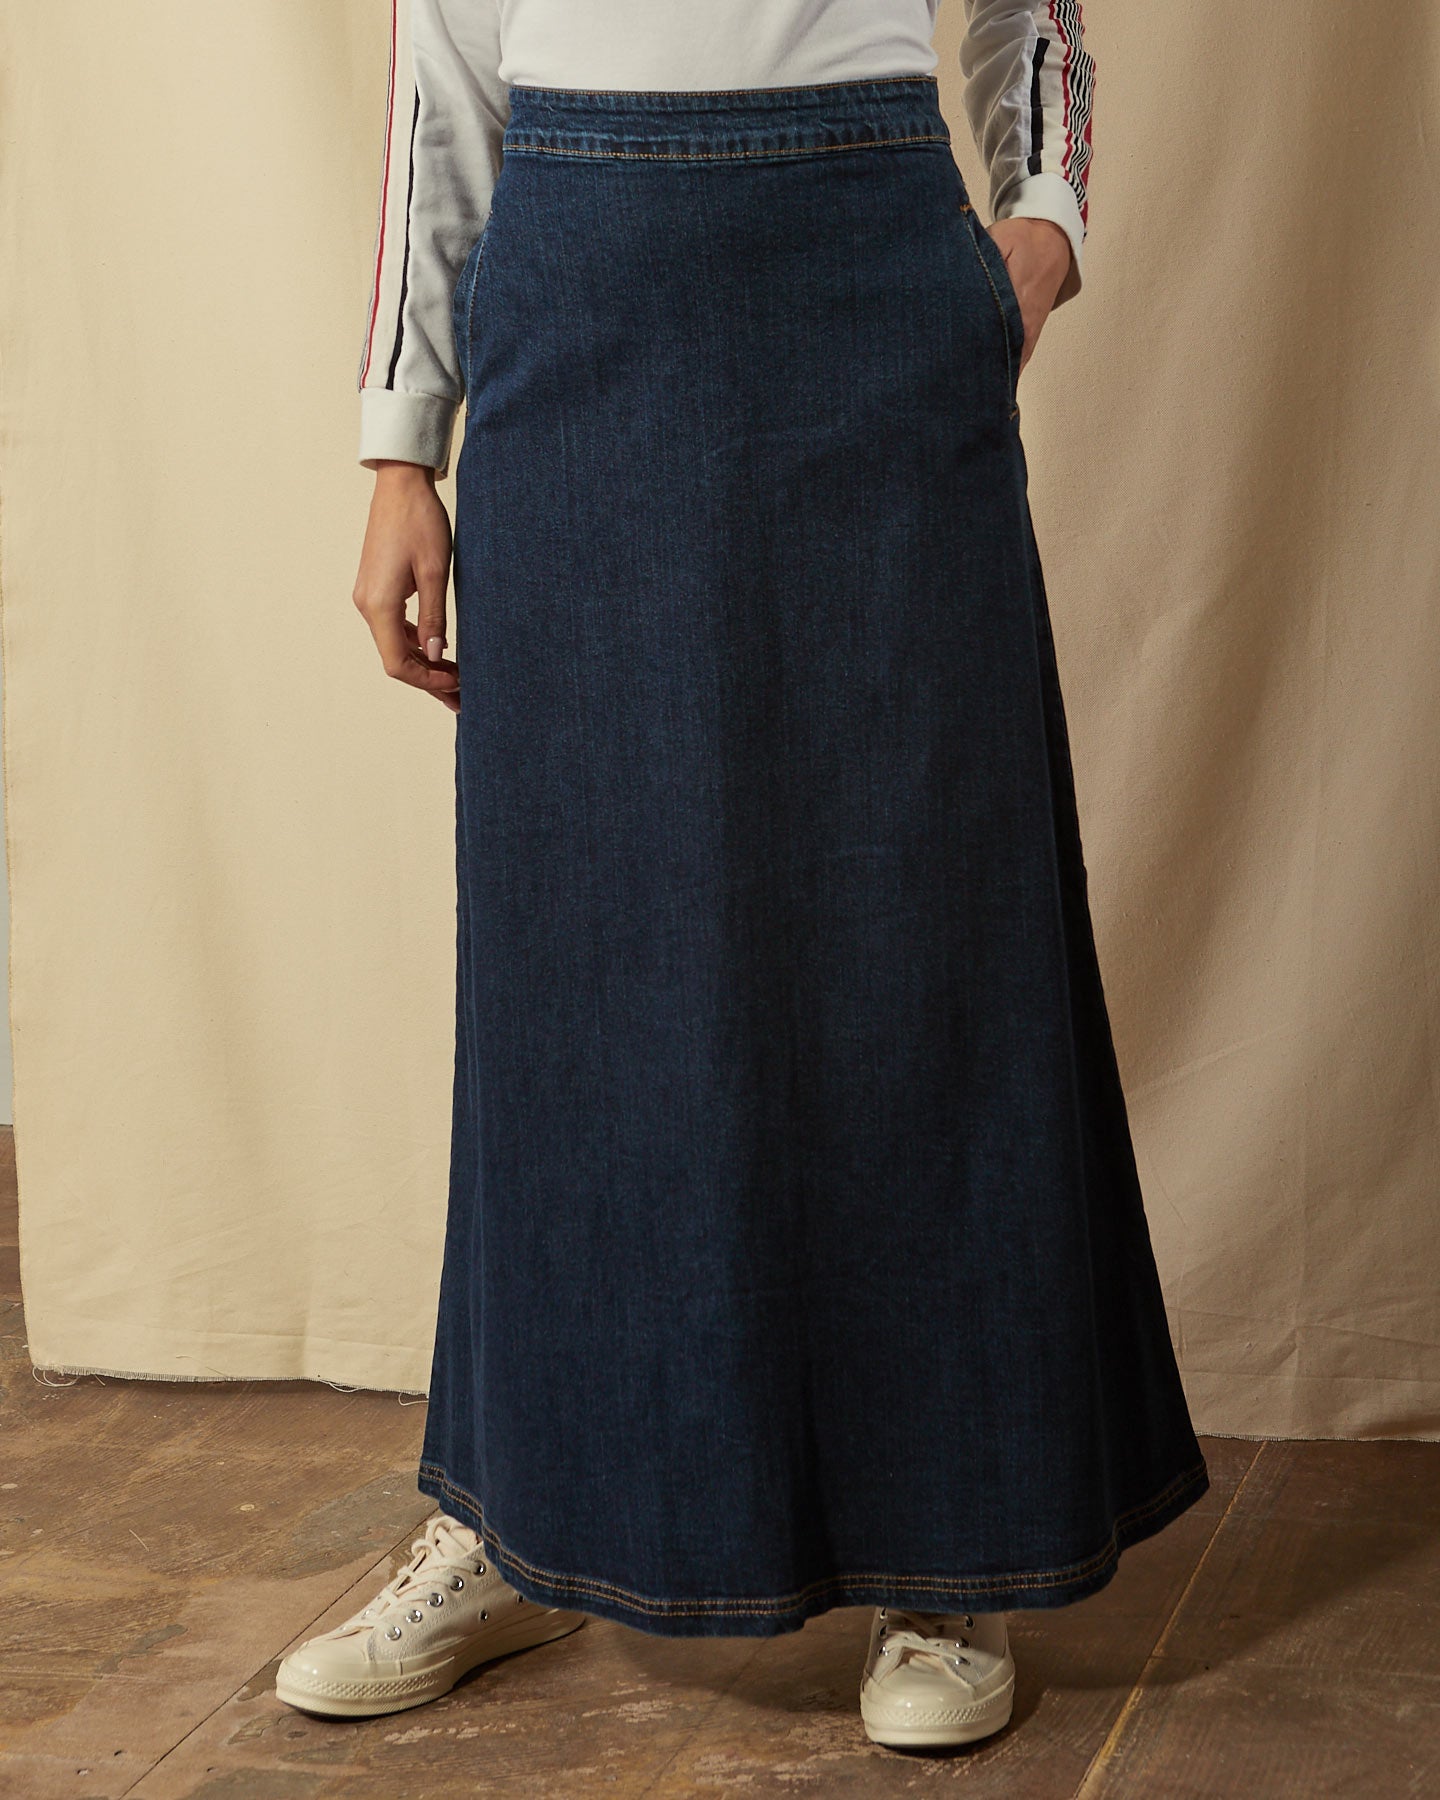 Close-up of Lottie darkwash denim full length skirt with clear view of stitched hem detailing and denim finish.